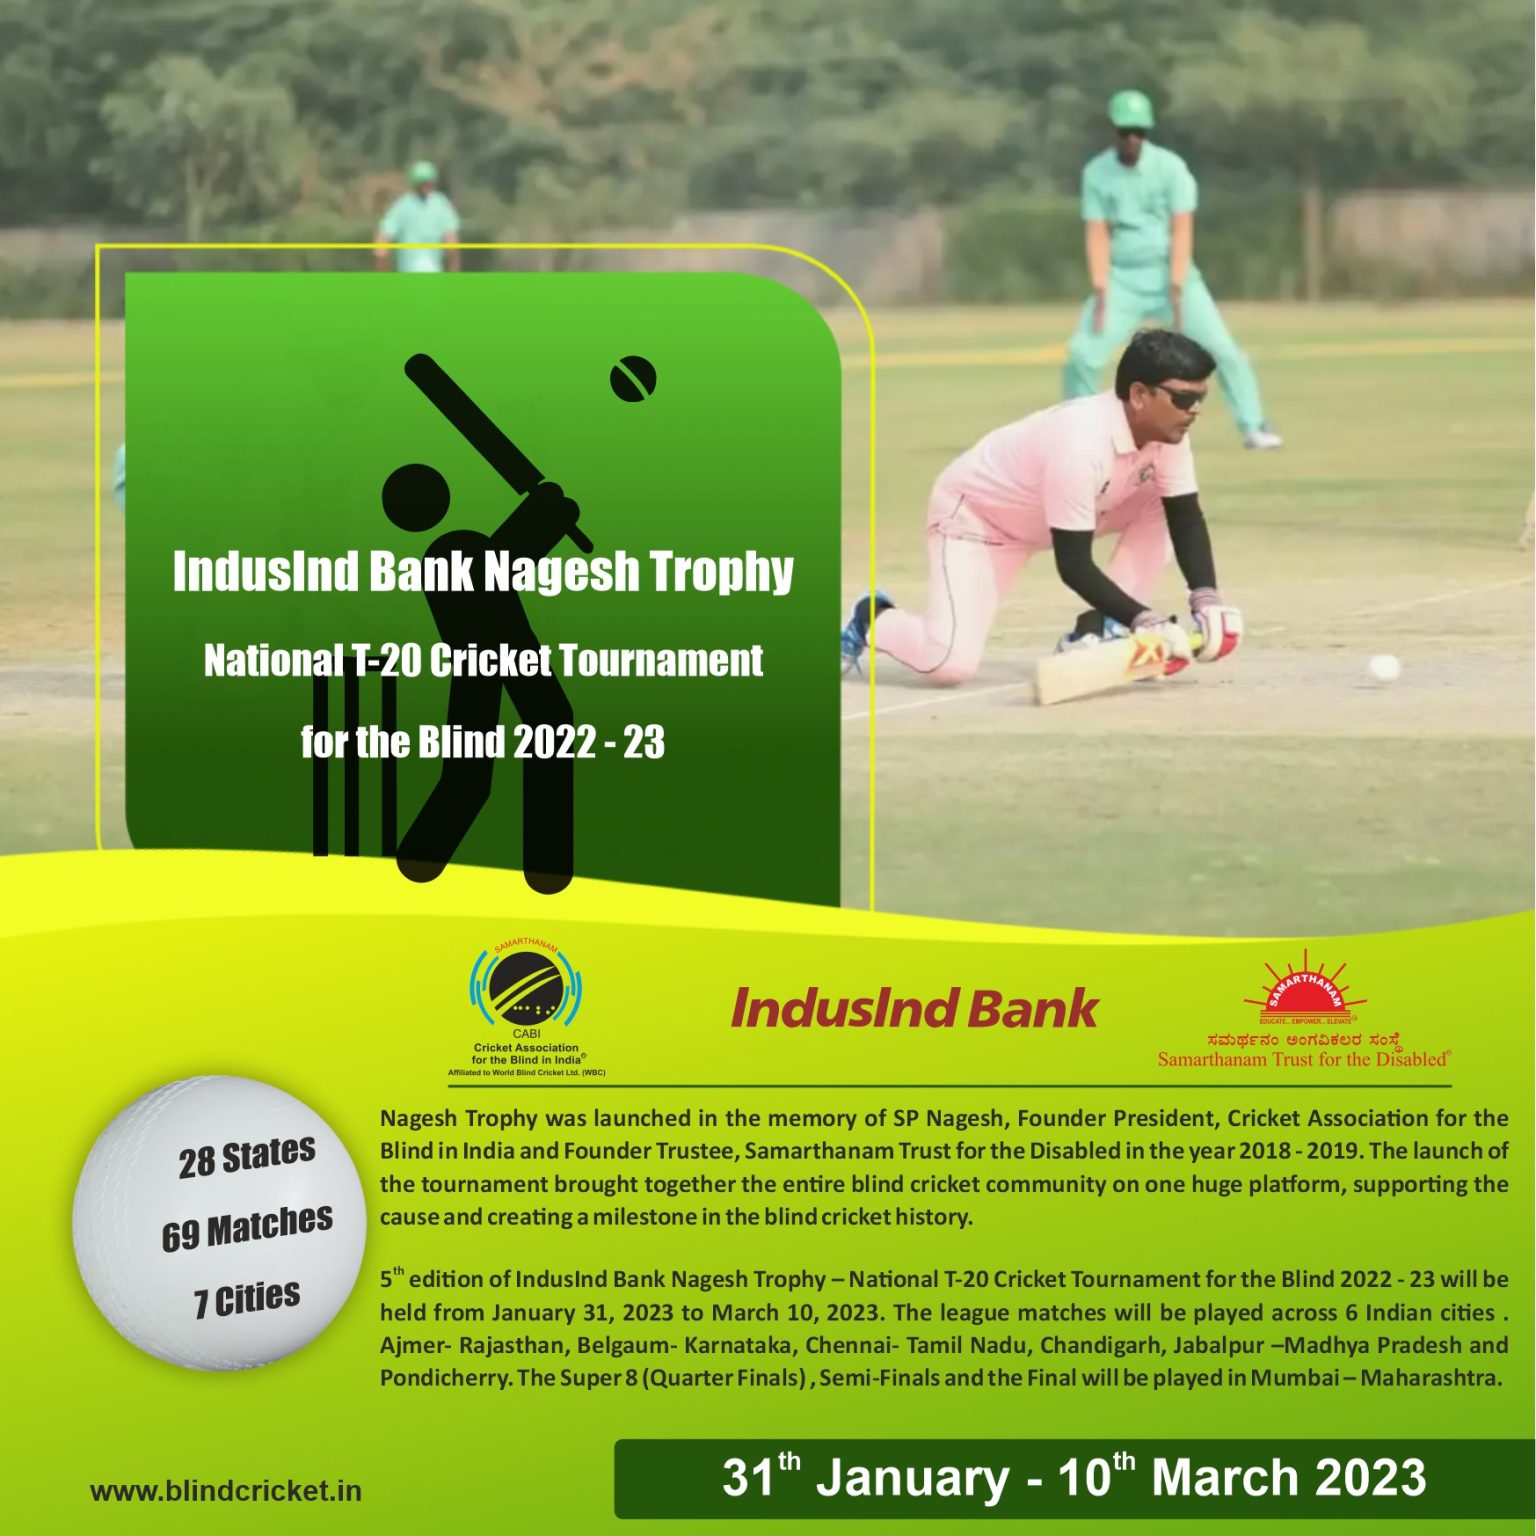 7 cities to host the 5th edition of IndusInd Bank Nagesh Trophy National T20 Cricket Tournament for the Blind 2022-23